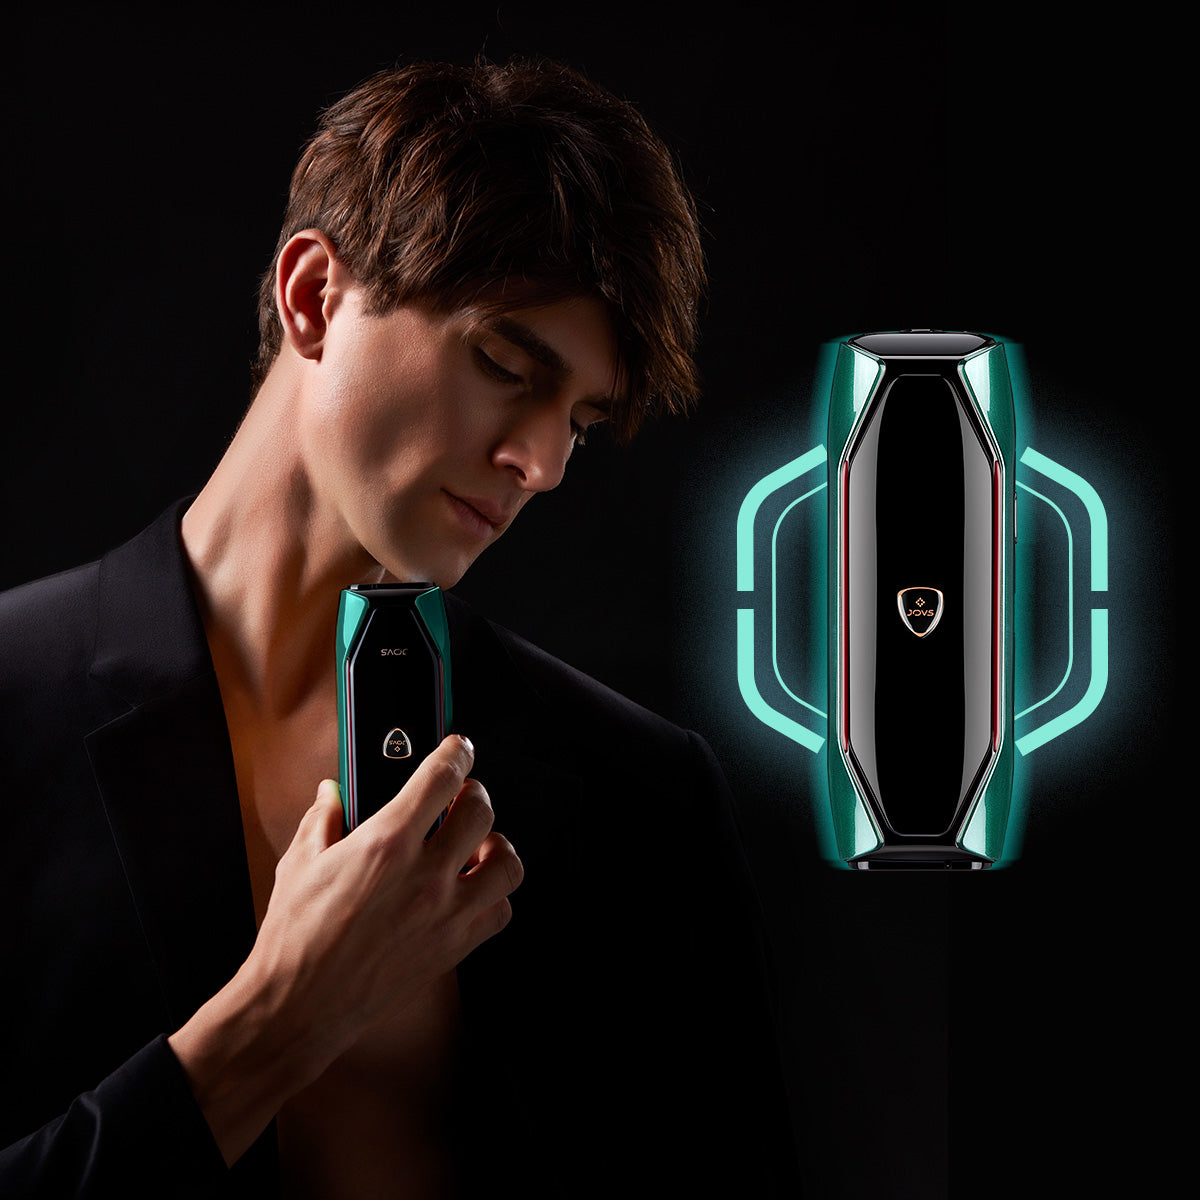 Man with JOVS X™ 3-in-1 Hair Removal Handset, showcasing the best IPL technology for men's hair removal and skin care needs